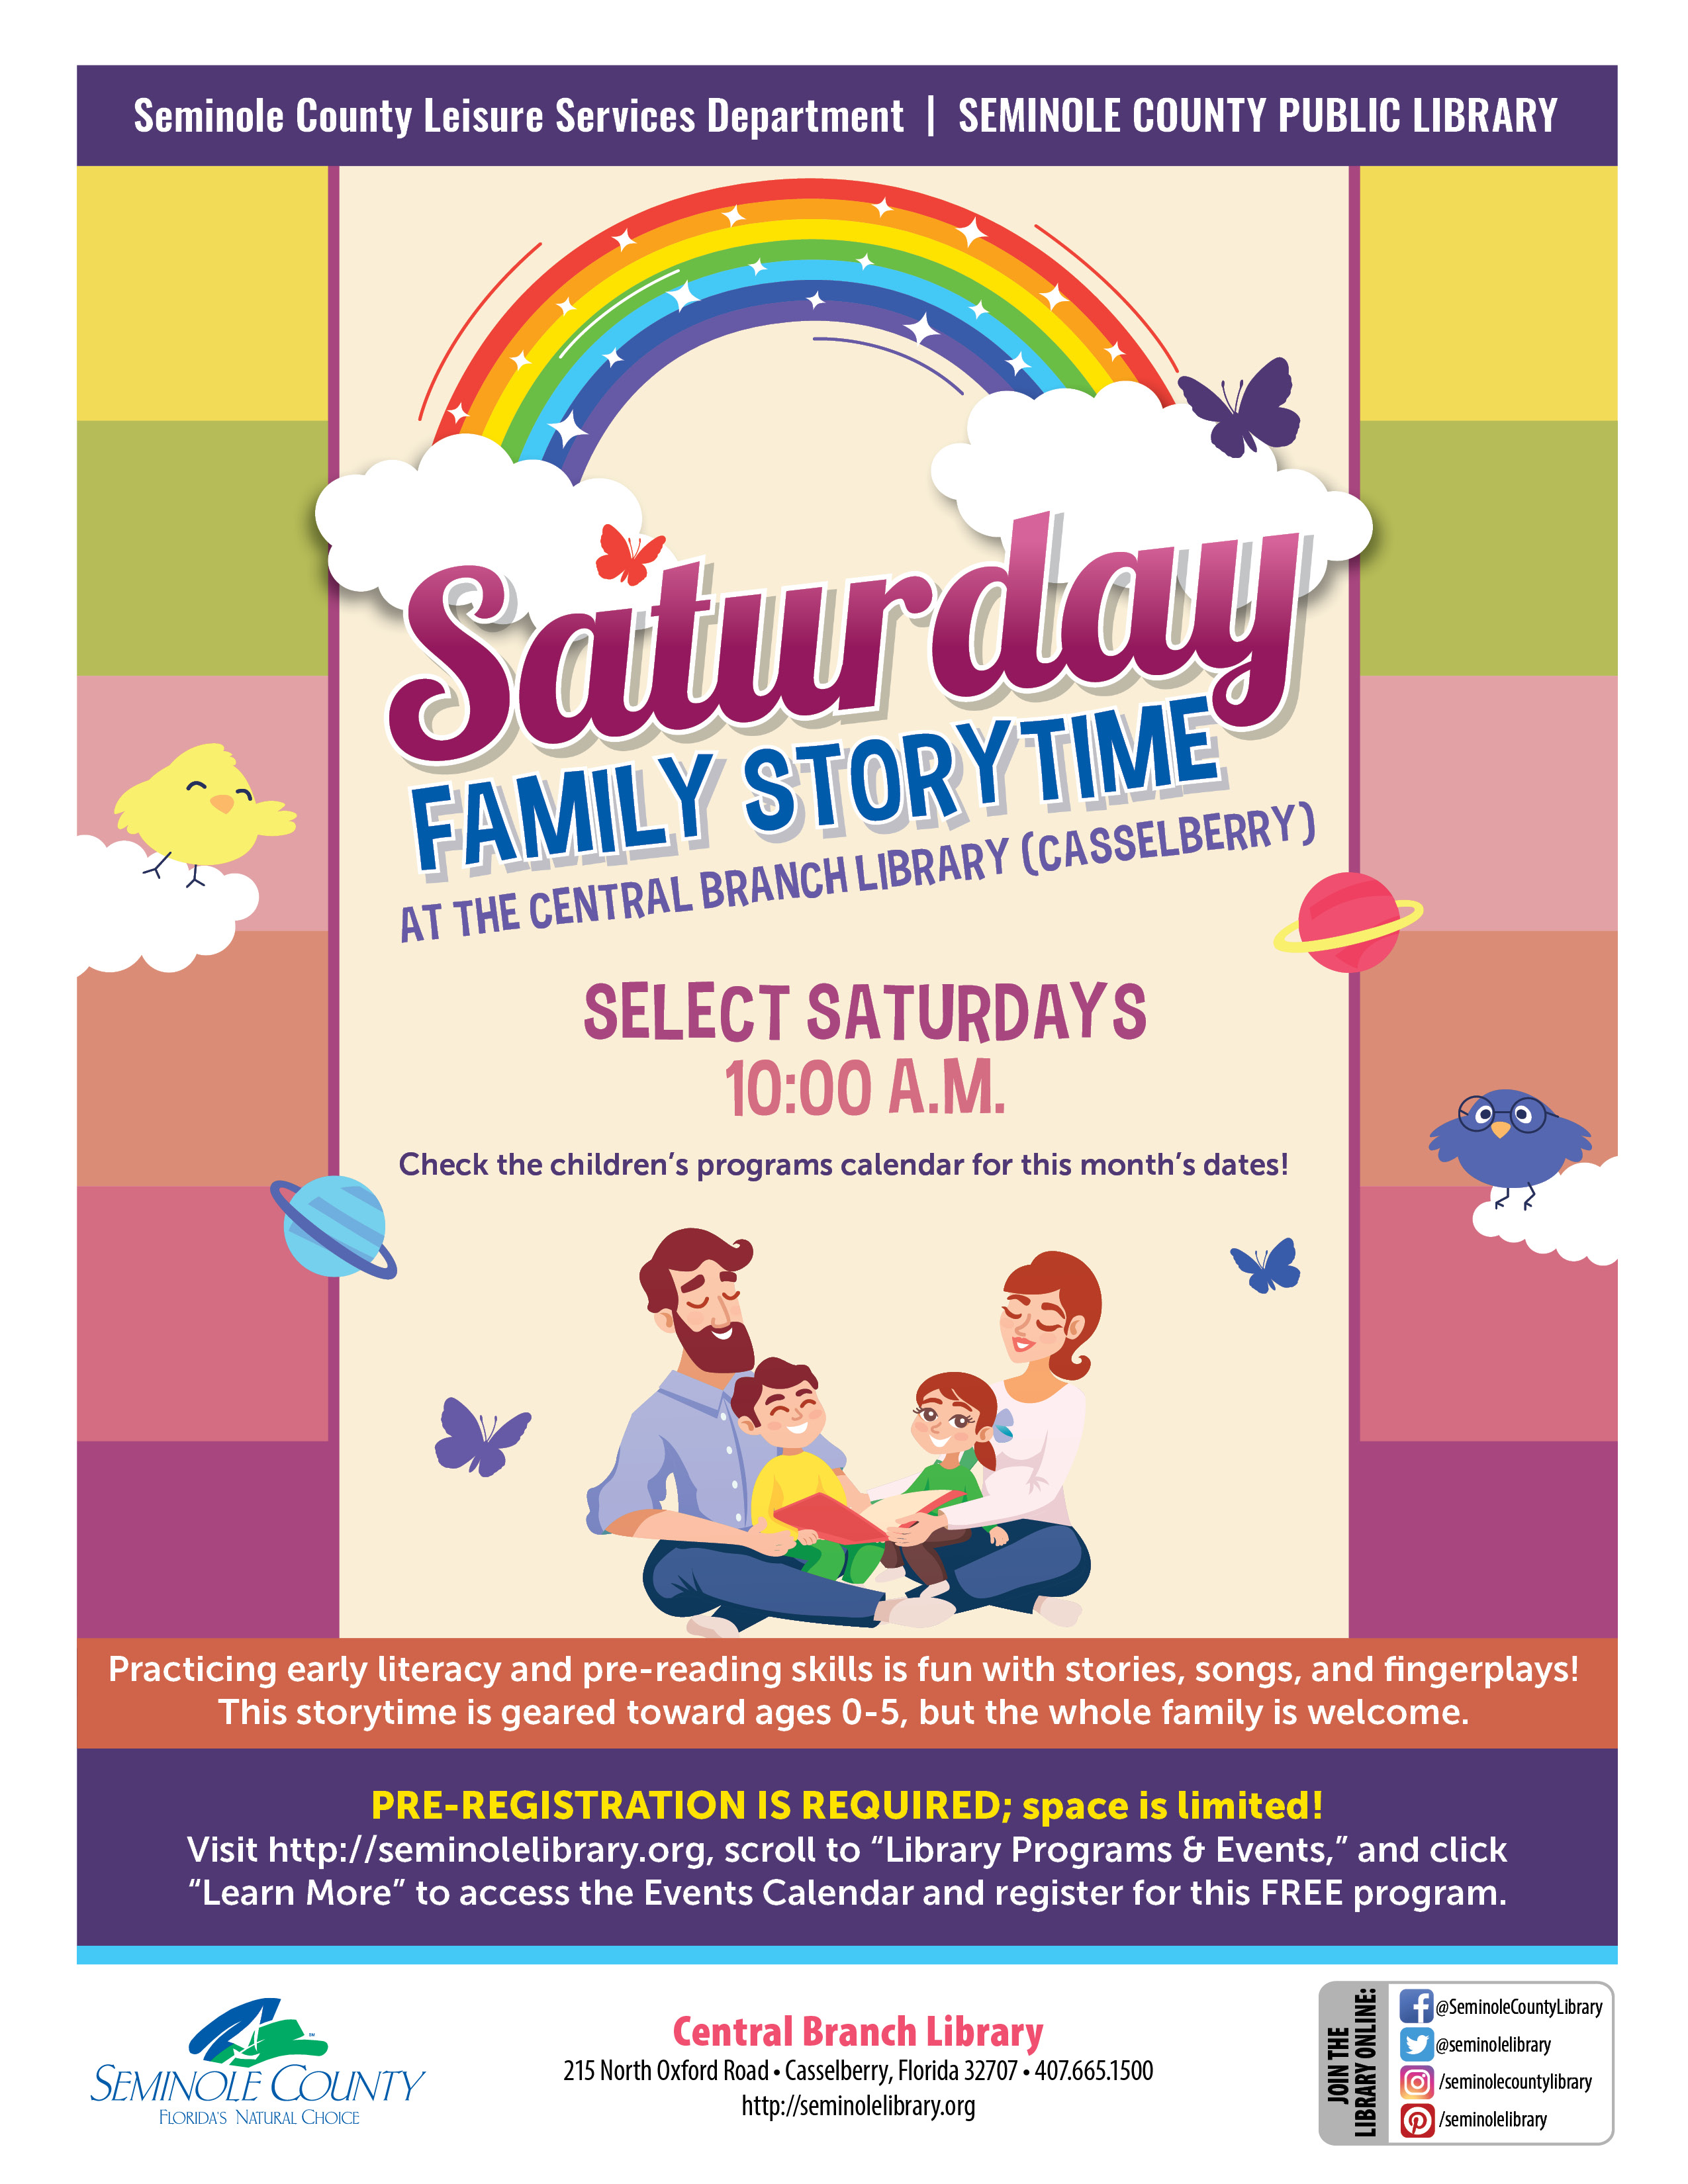 Central Branch - Saturday Family Storytime